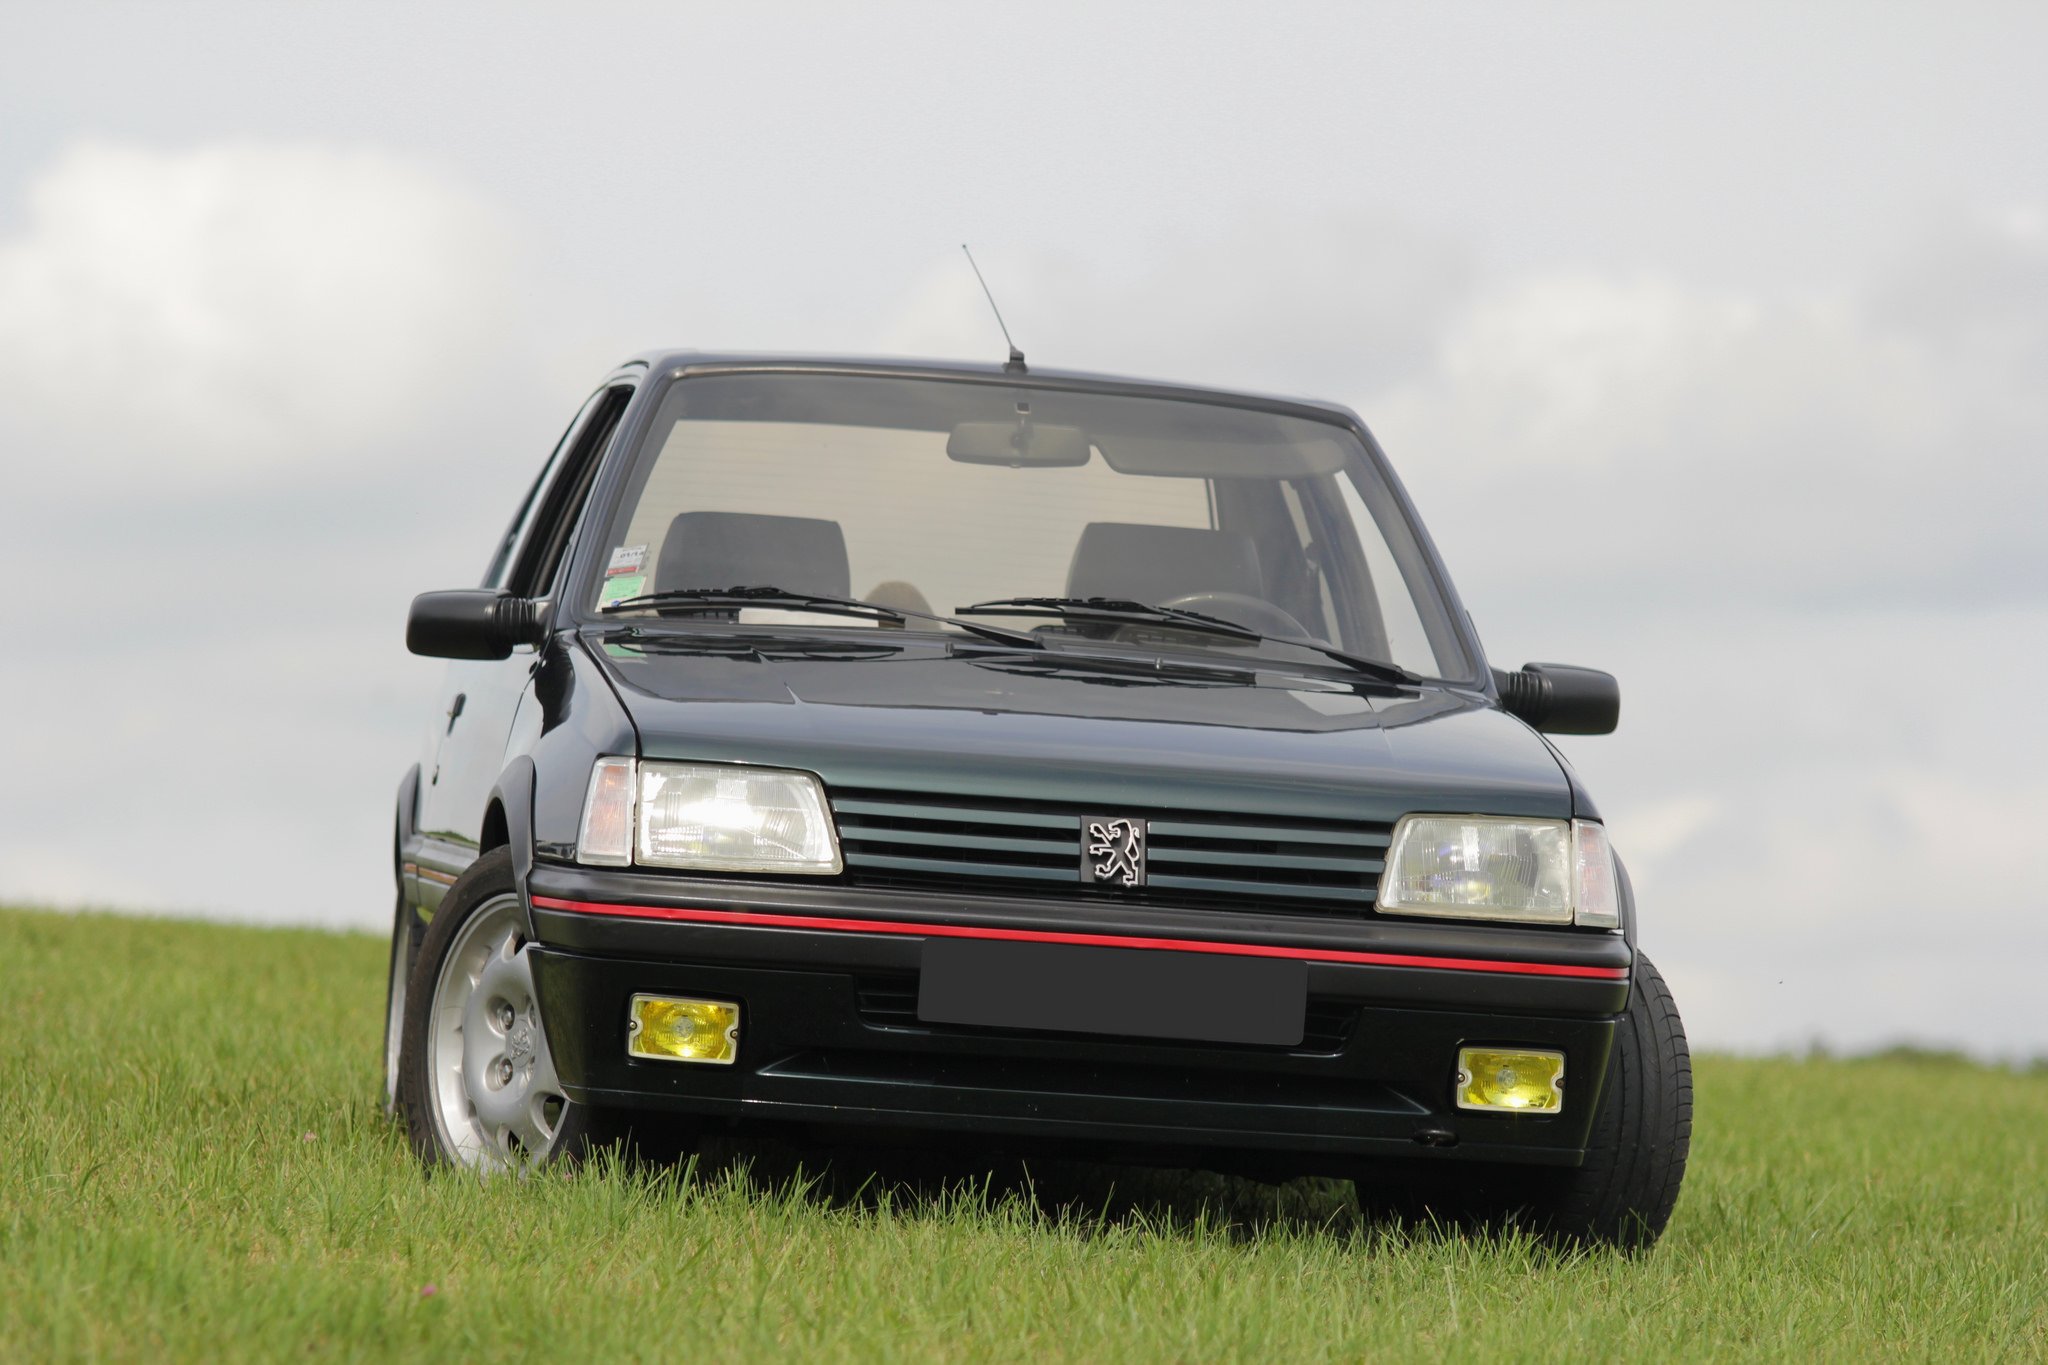 peugeot, 205, Gti, Cars, Coupe, French, Black Wallpaper